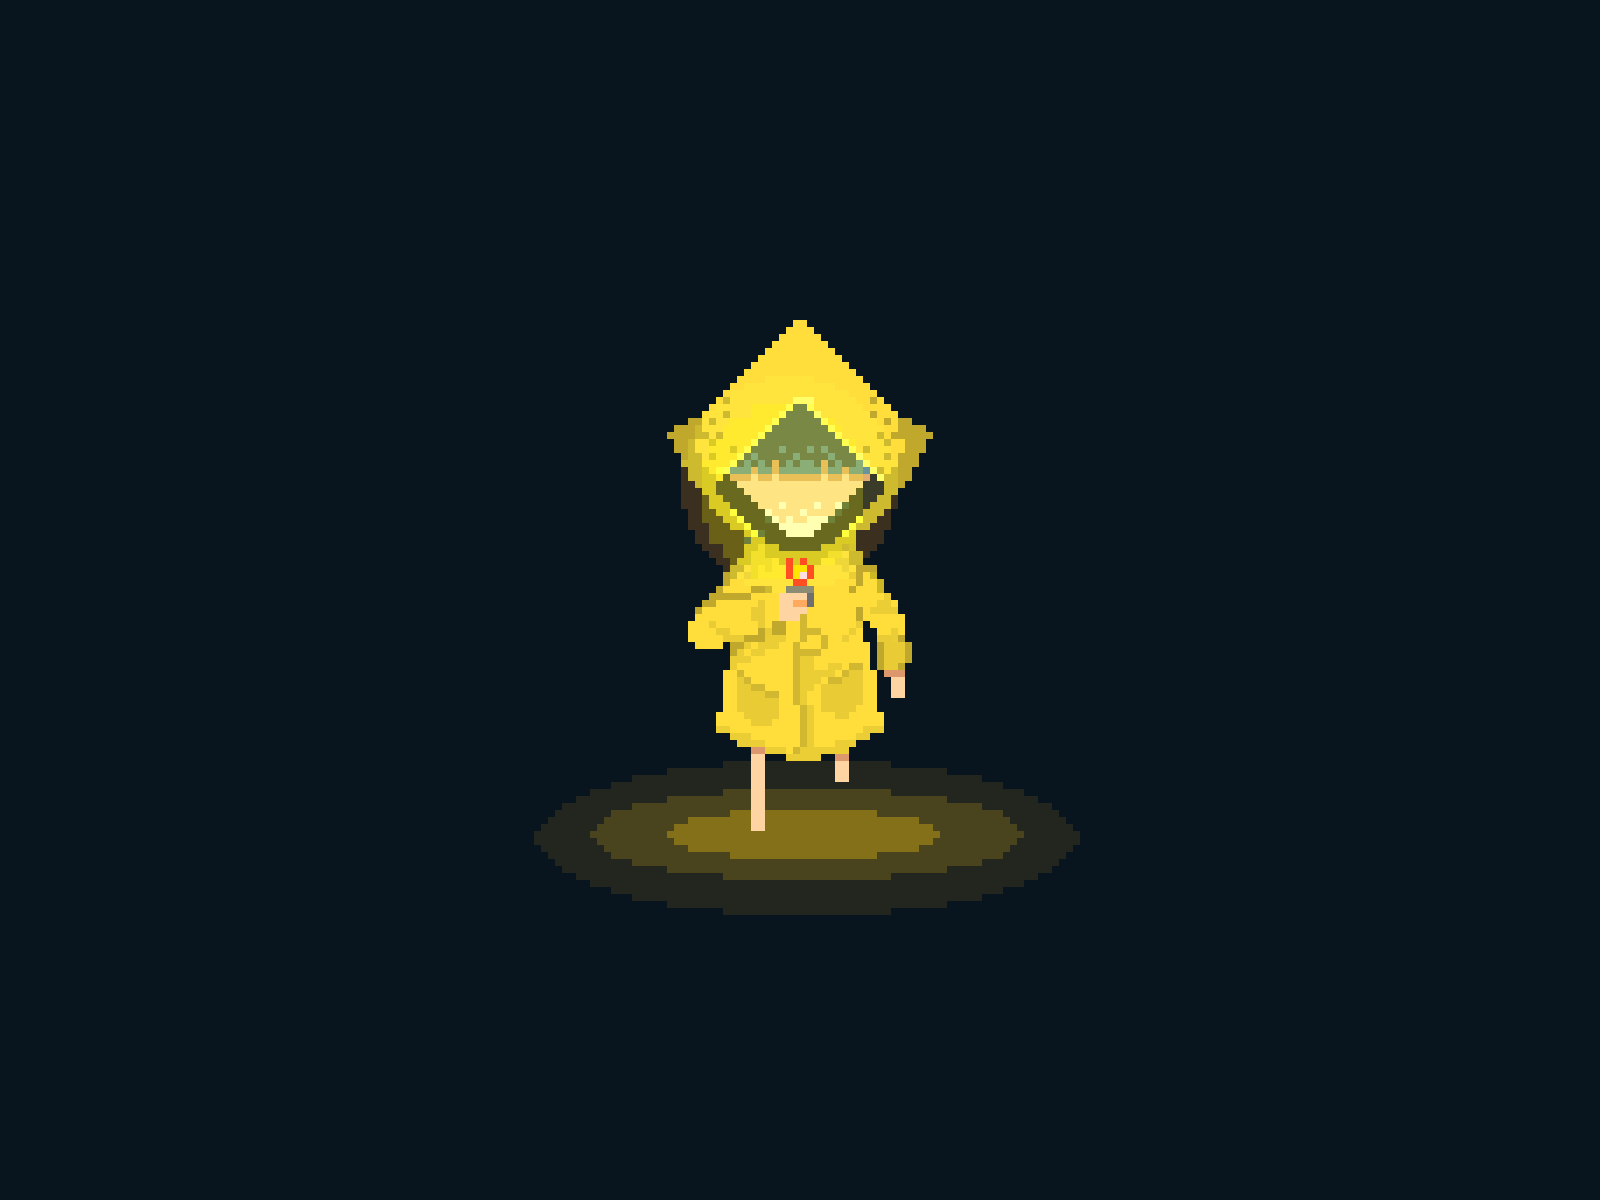 'Six' from Little Nightmares animation little nightmares pixel pixel animation pixelart six